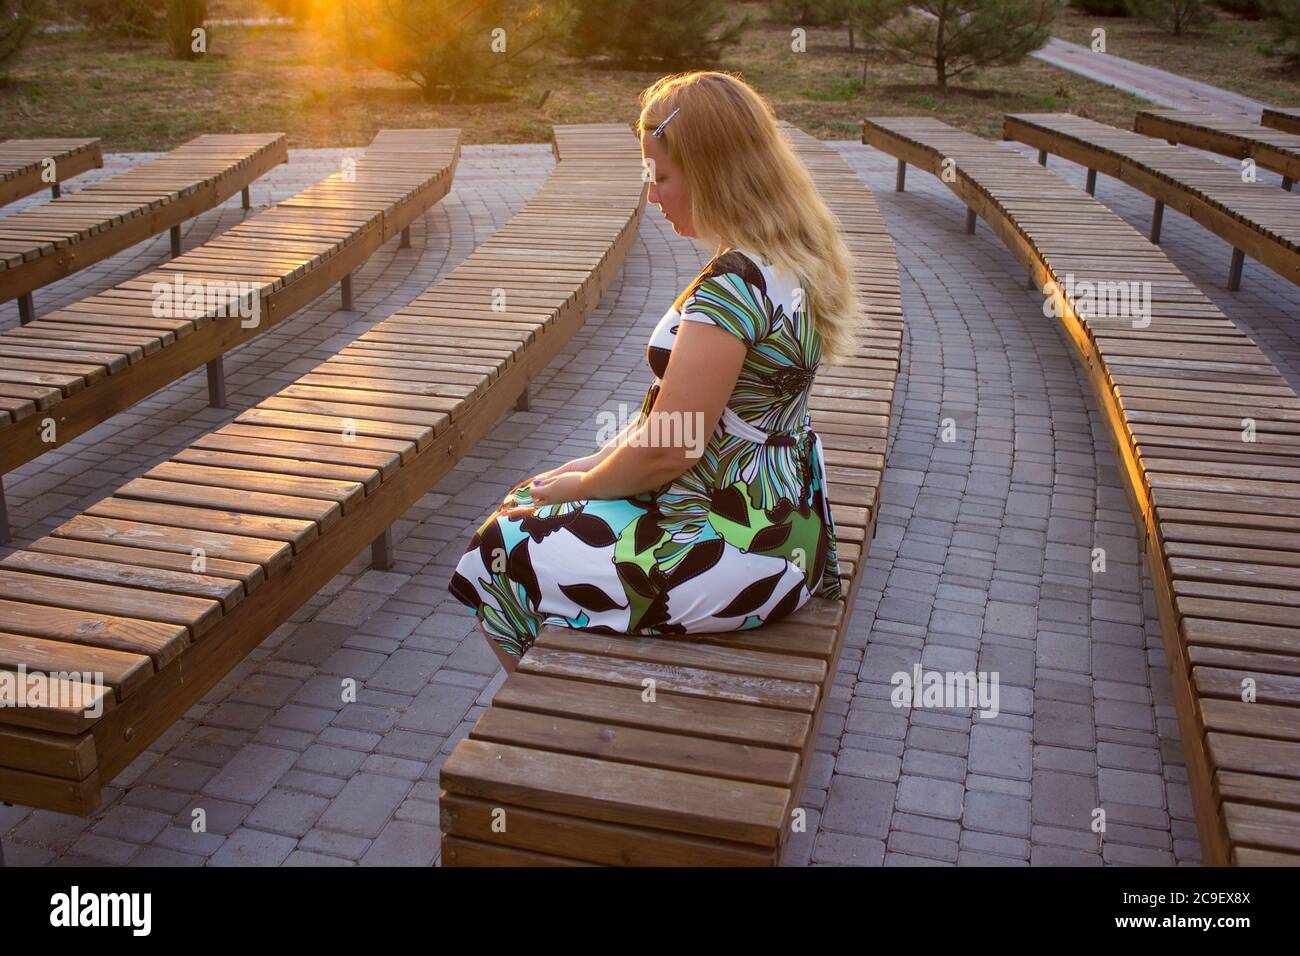 The girl is sitting alone in her back among the many benches of the street theater Stock Photo